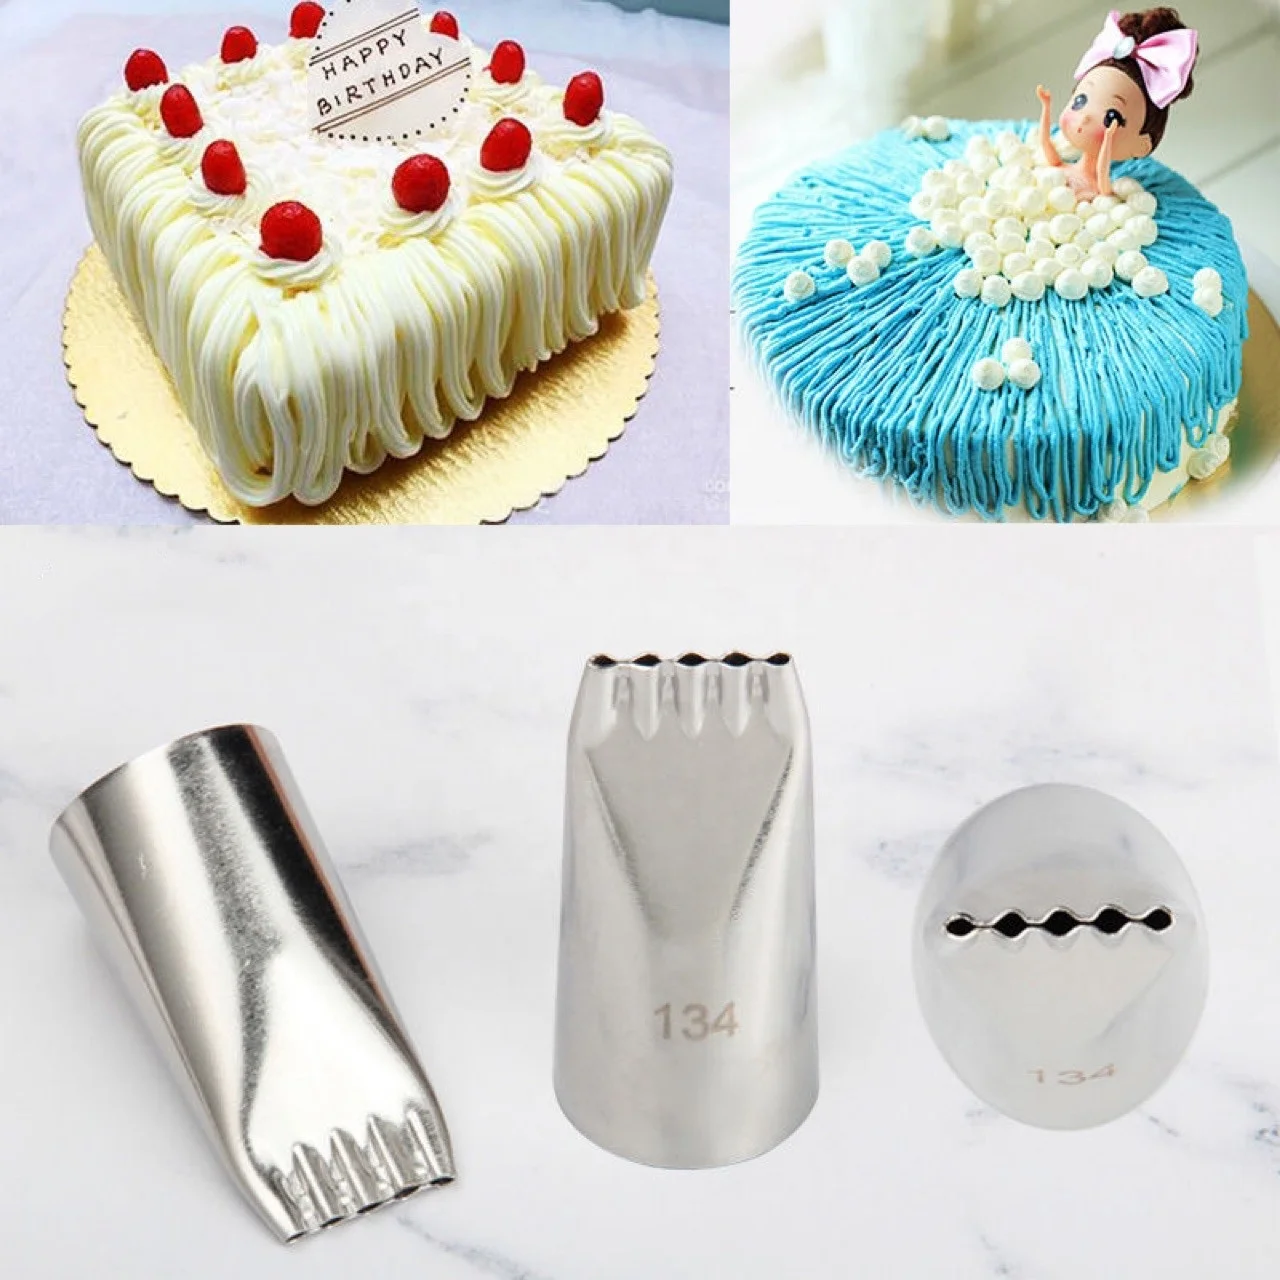 134# Good Quality Piping Tips Cake Decorating Nozzle Icing Nozzles Bakes Flower Yogurt Soluble Beans Nozzles